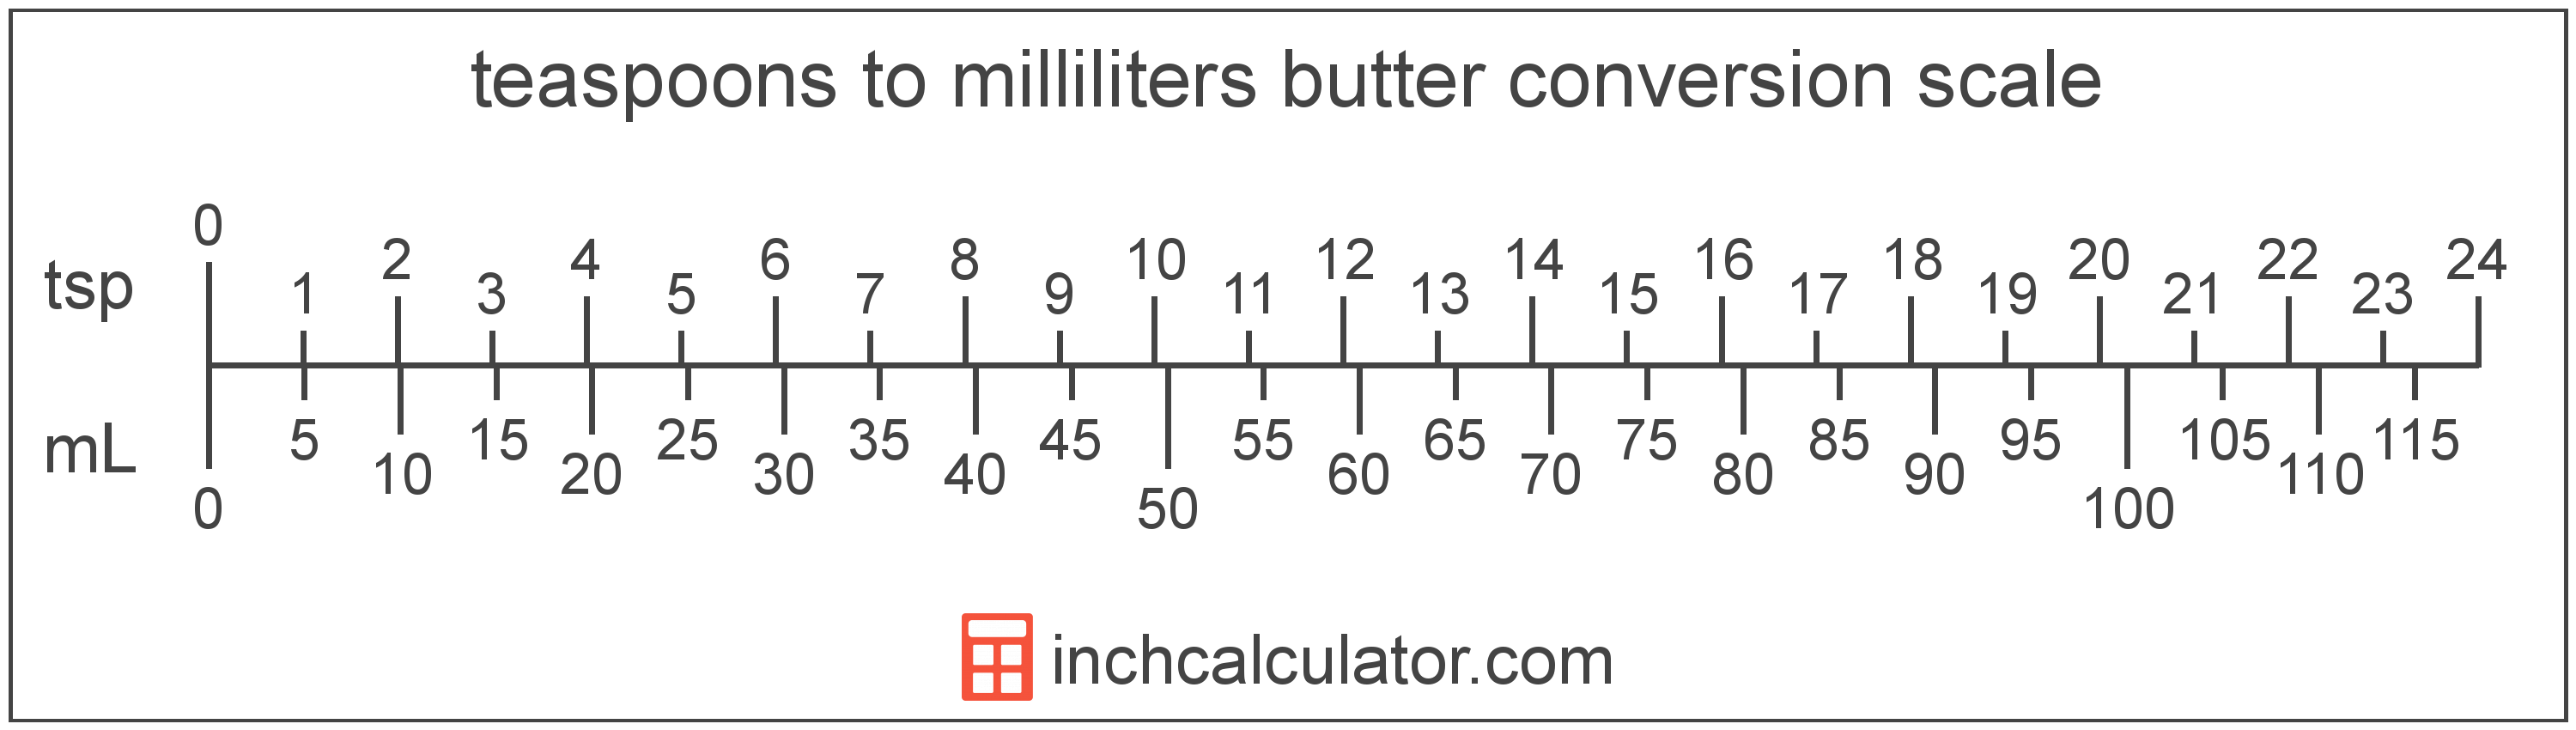 Teaspoon Butter To Milliliter Butter Conversion Scale 